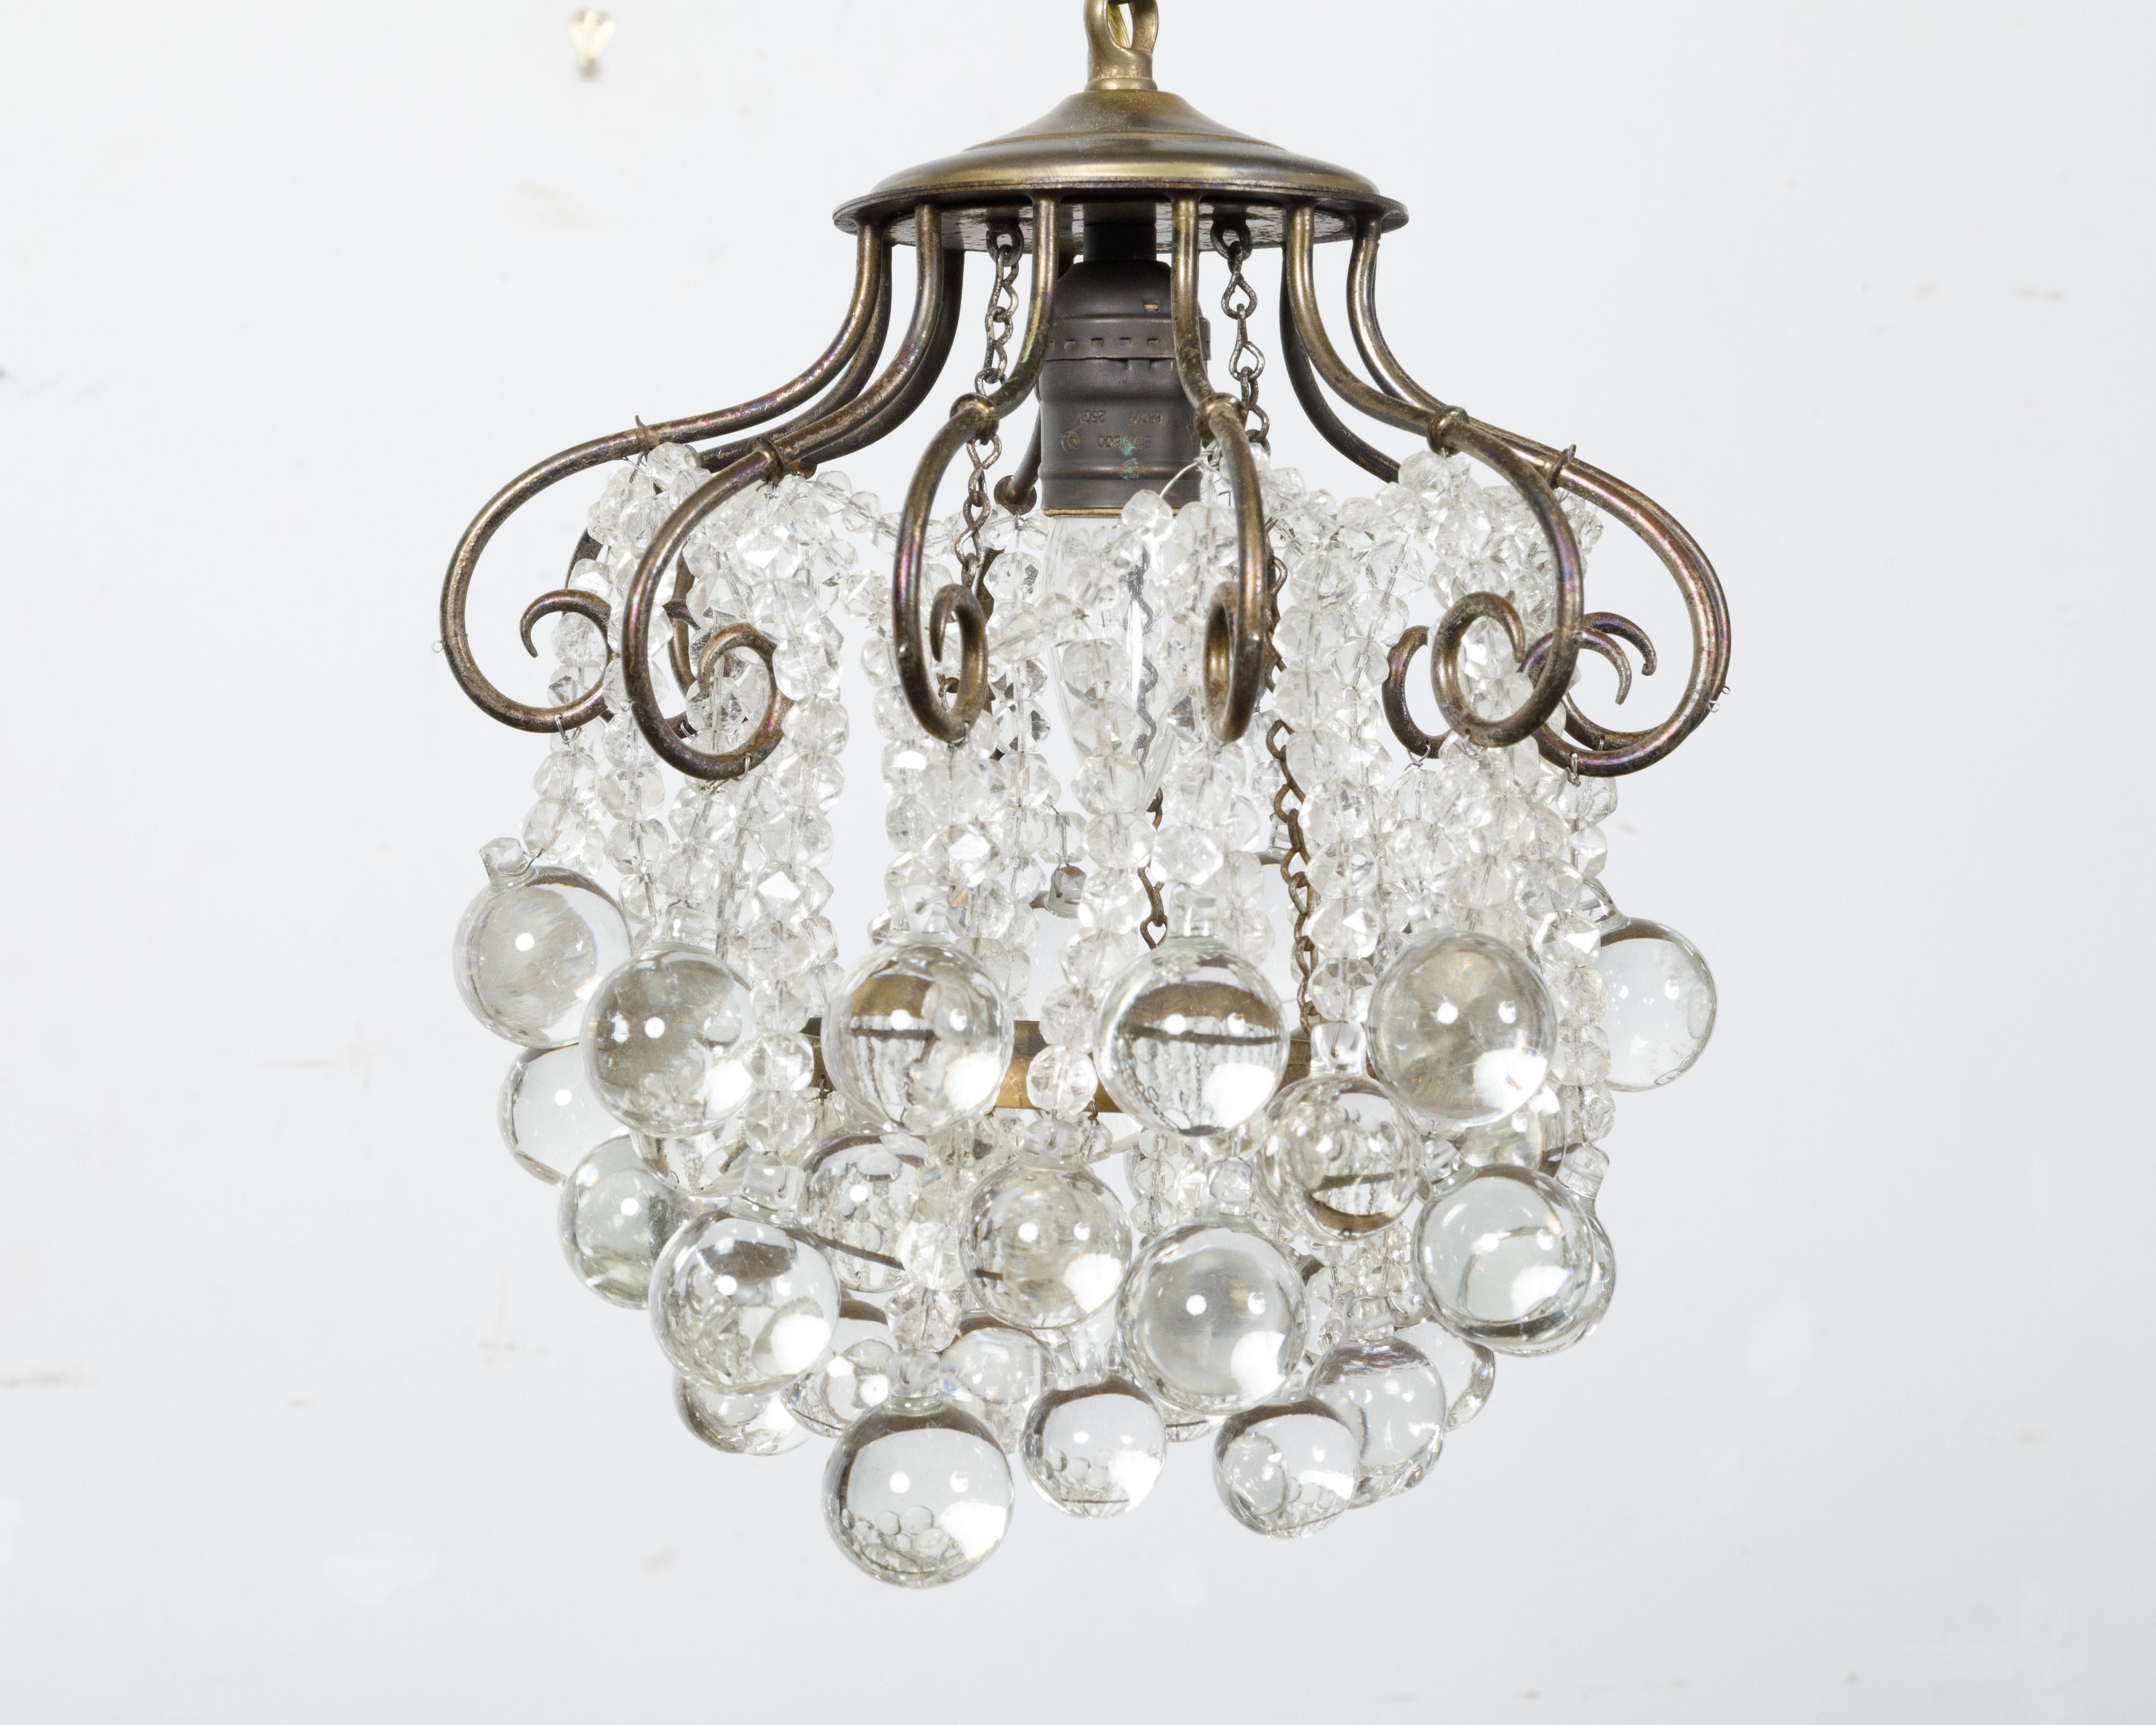 1920s French Crystal Chandelier with Cascading Effects and Scrolls, USA Wired For Sale 5